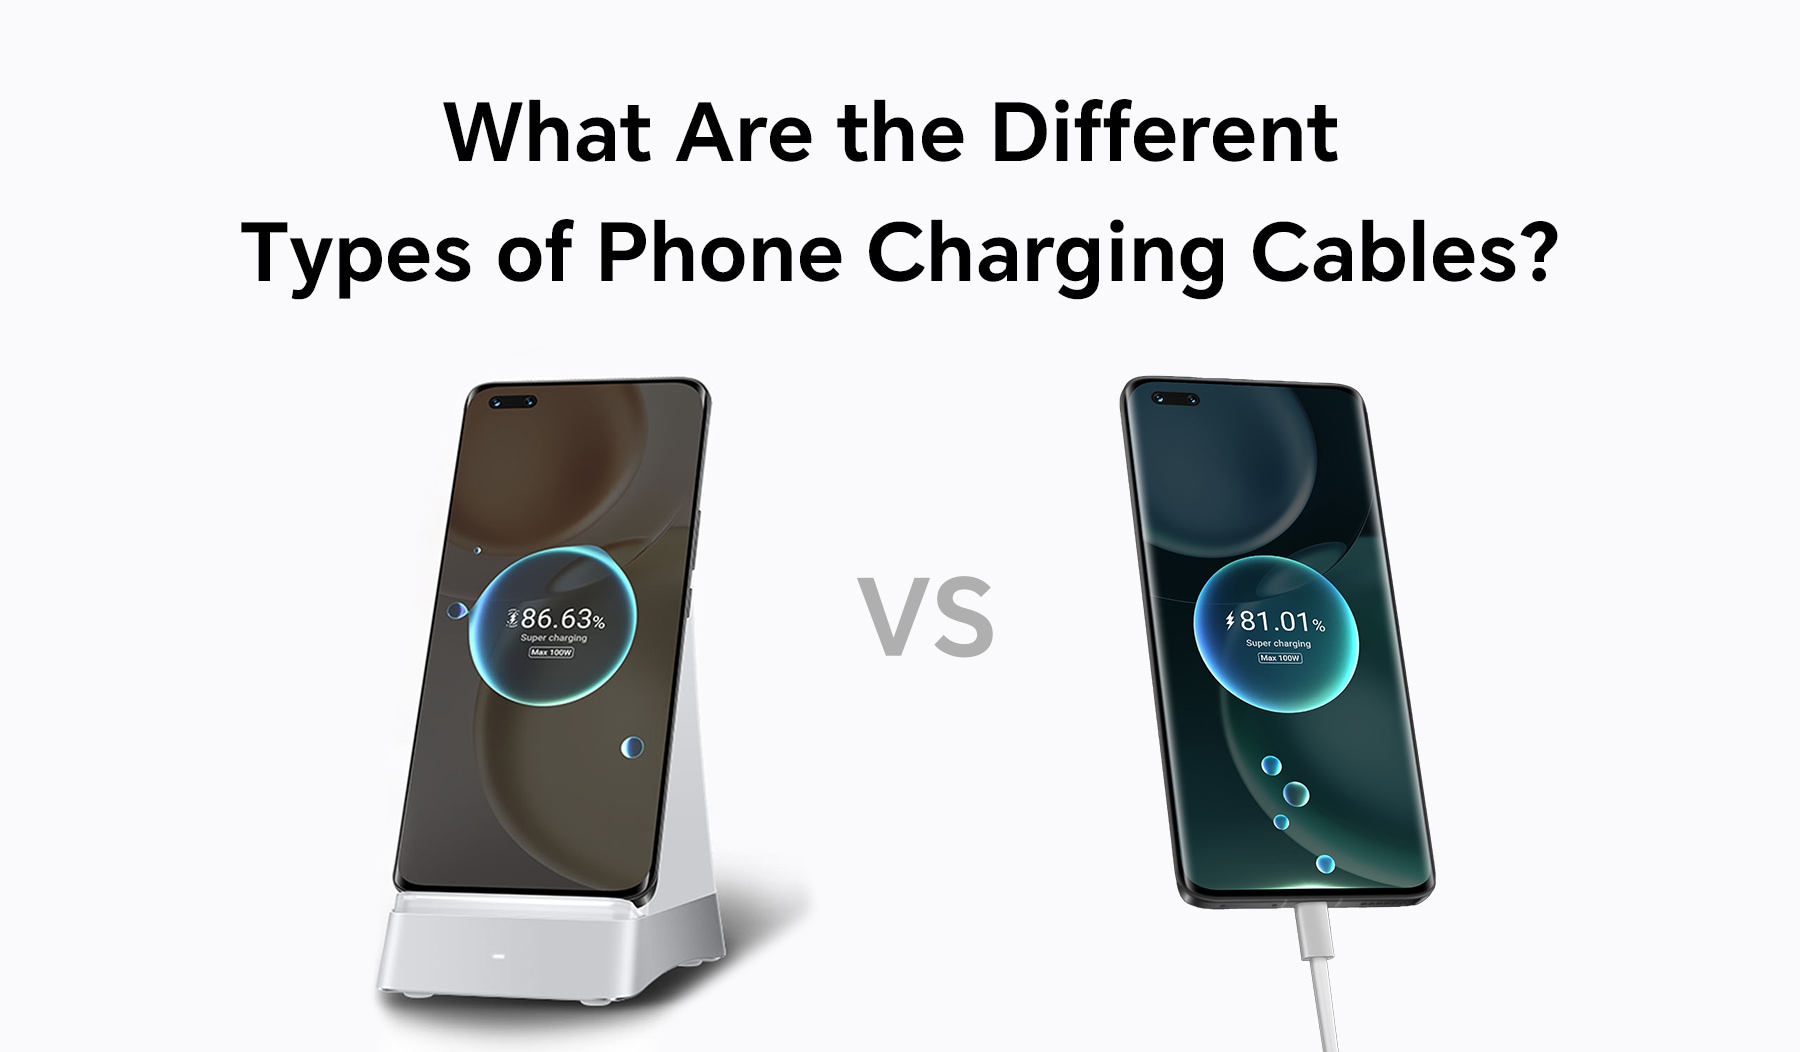 What Are the Different Types of Phone Charging Cables?